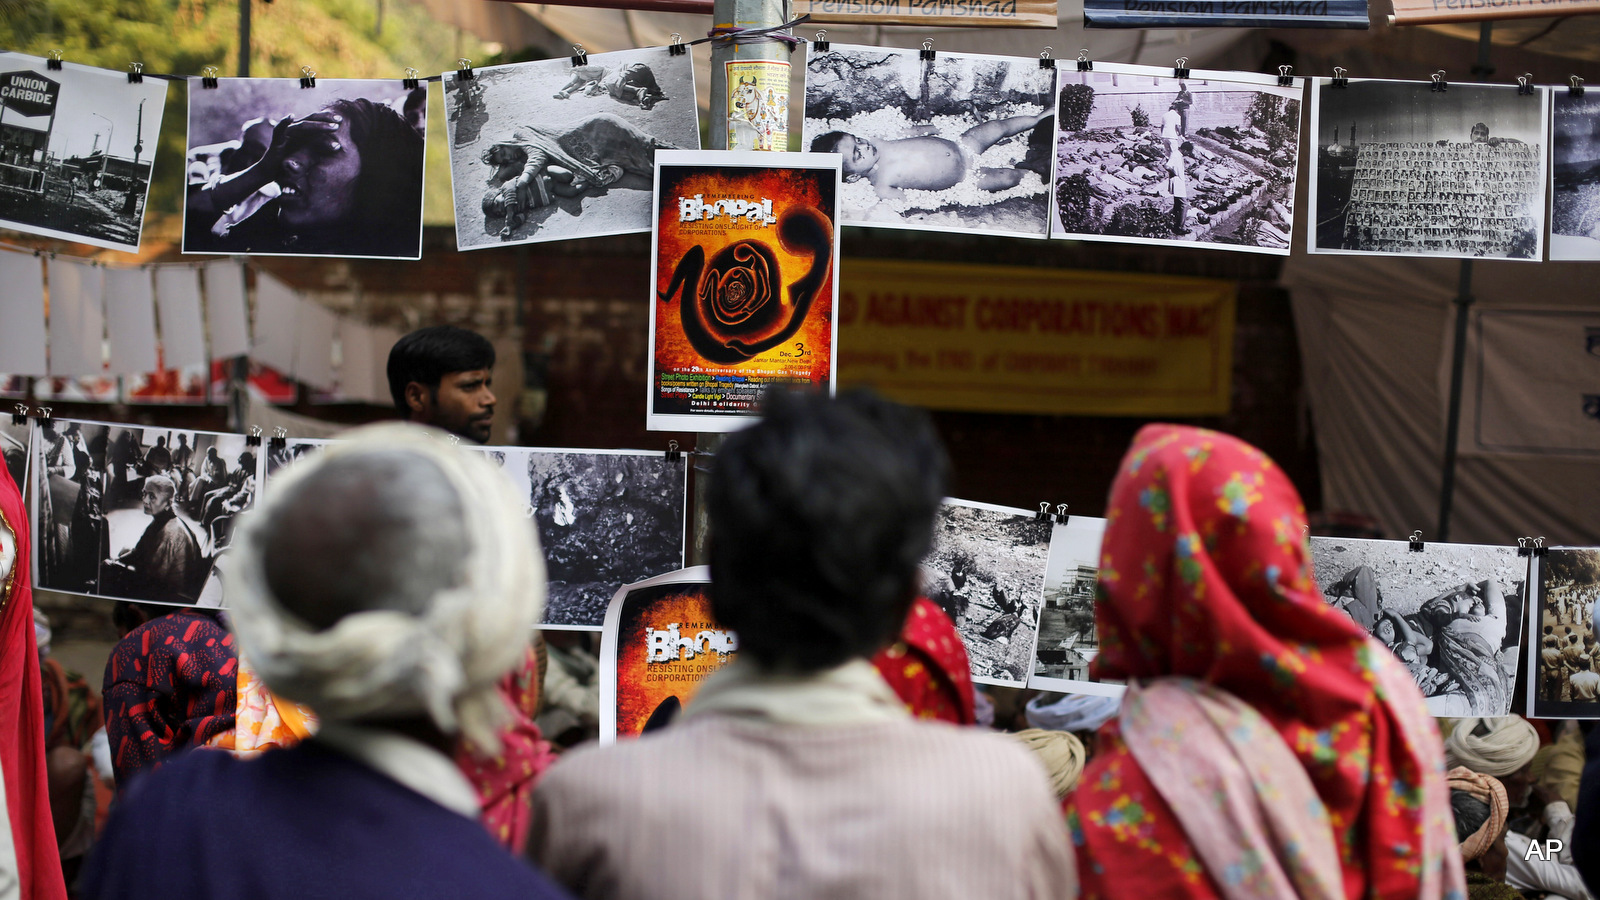 Survivors and their supporters look at photographs of the Bhopal gas disaster displayed during a protest on the anniversary of the tragedy near the Indian parliament in New Delhi, India, Tuesday, Dec. 3, 2013. On this day in 1984, thousands of people died after a cloud of methyl isocyanate gas escaped from a pesticide plant operated by a Union Carbide subsidiary in Bhopal in central India.